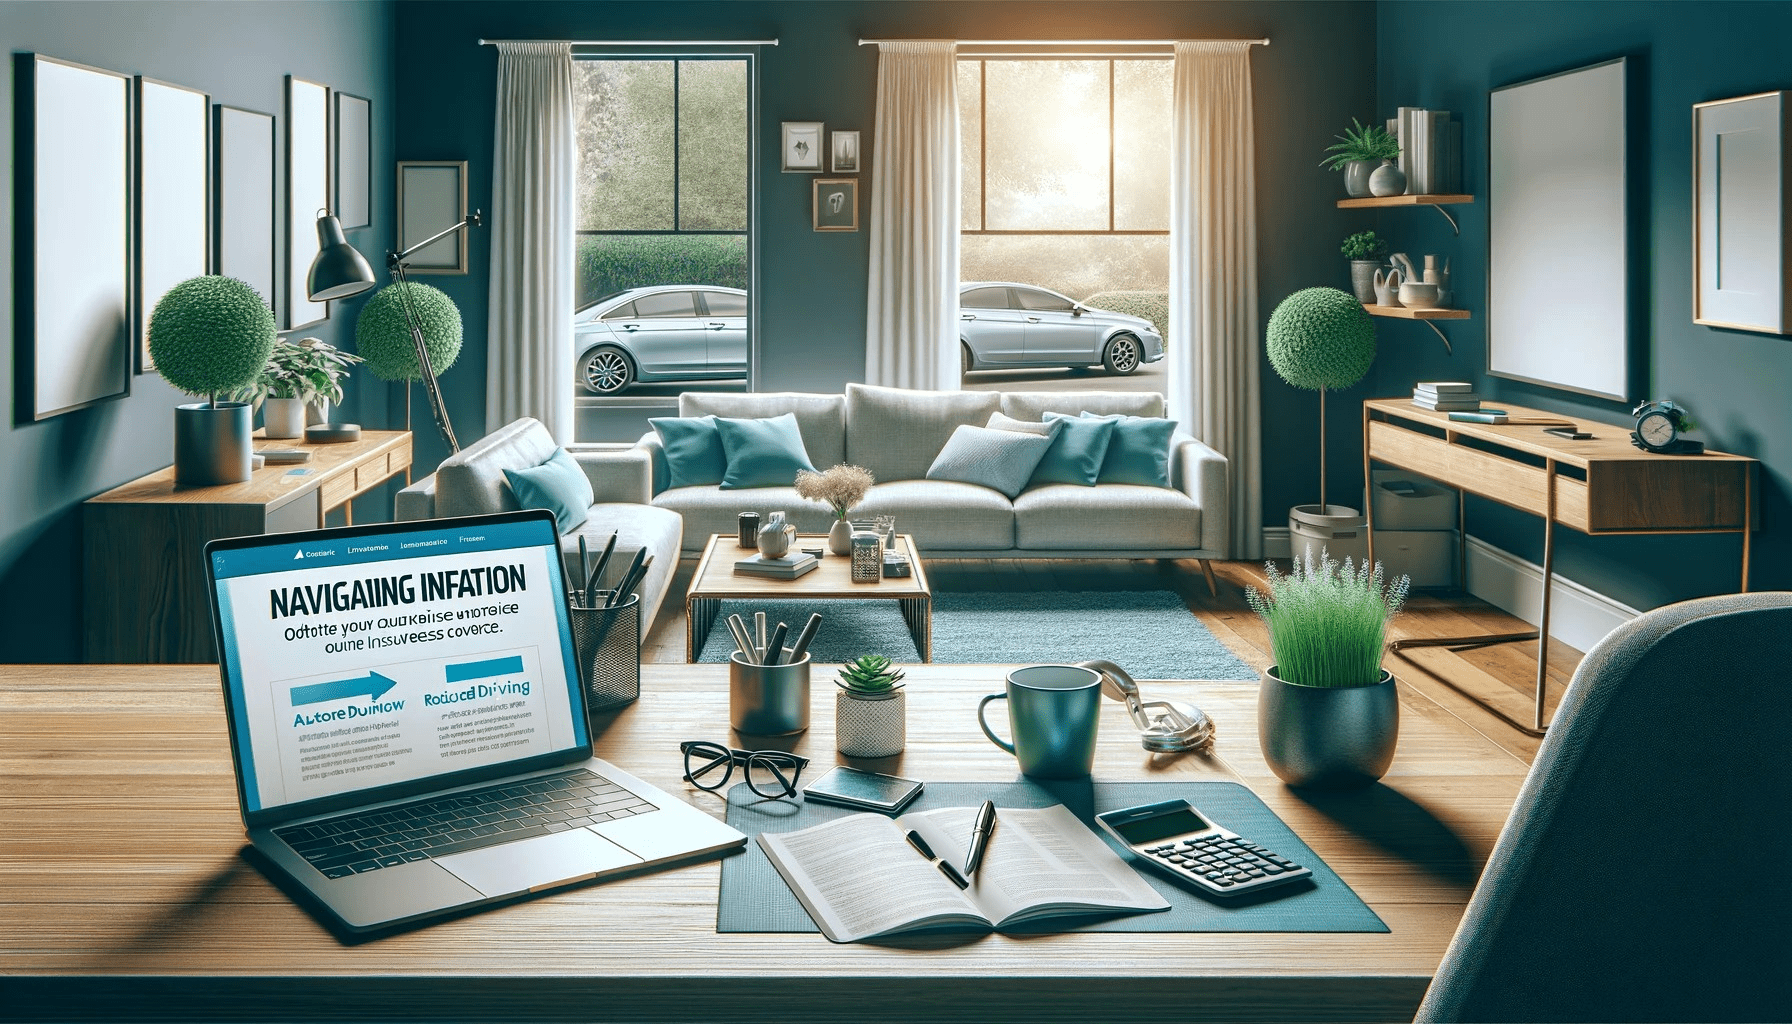 Modern home office with laptop and office equipment, cozy living room in the background, and a parked car visible through a window.